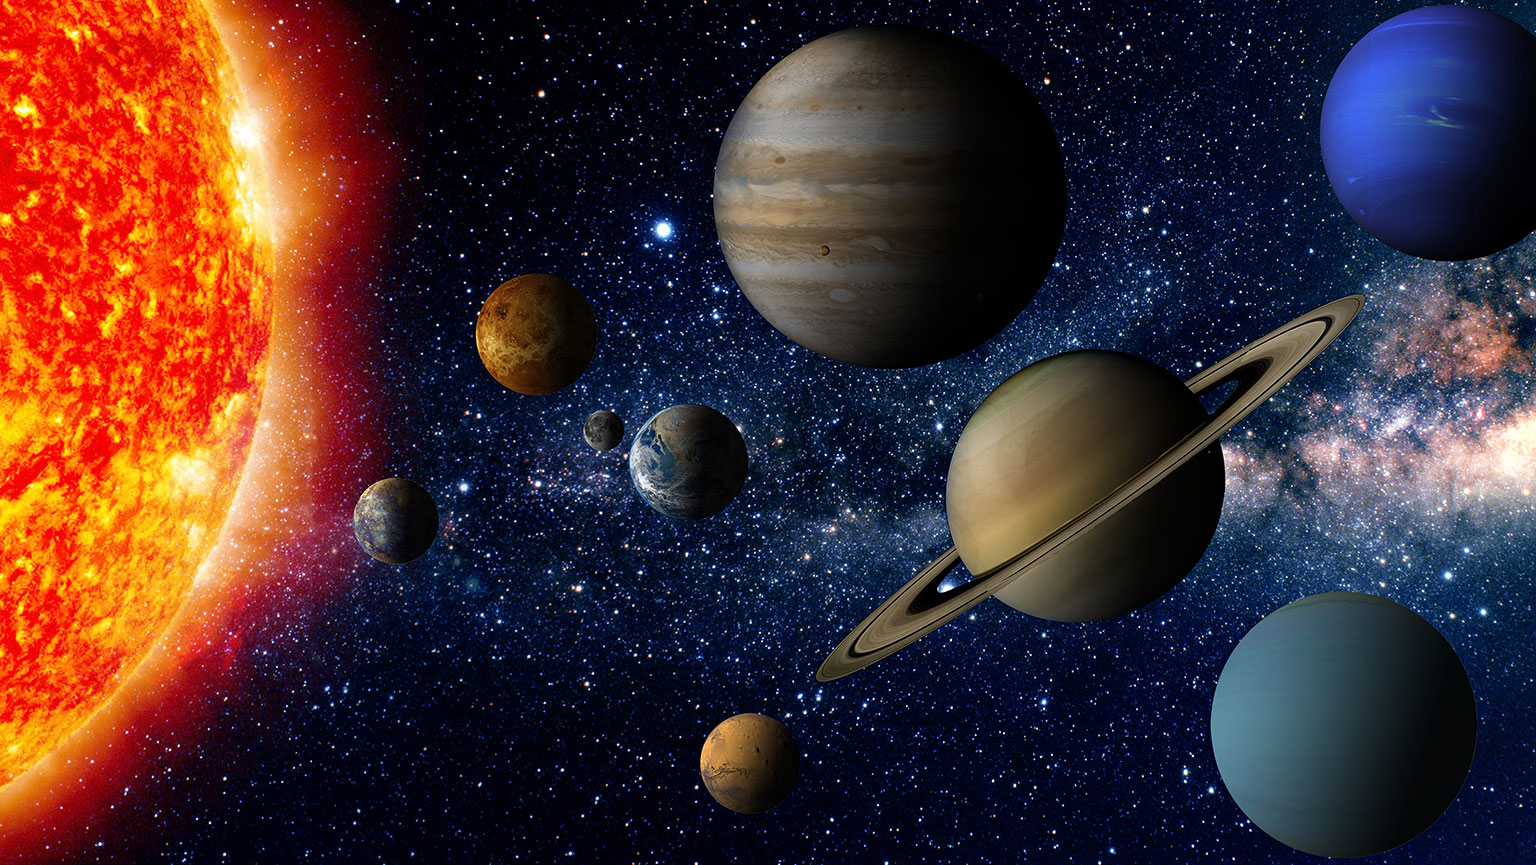 Answer These 22 Questions to Find Out If You Have Enough General Knowledge Solar System